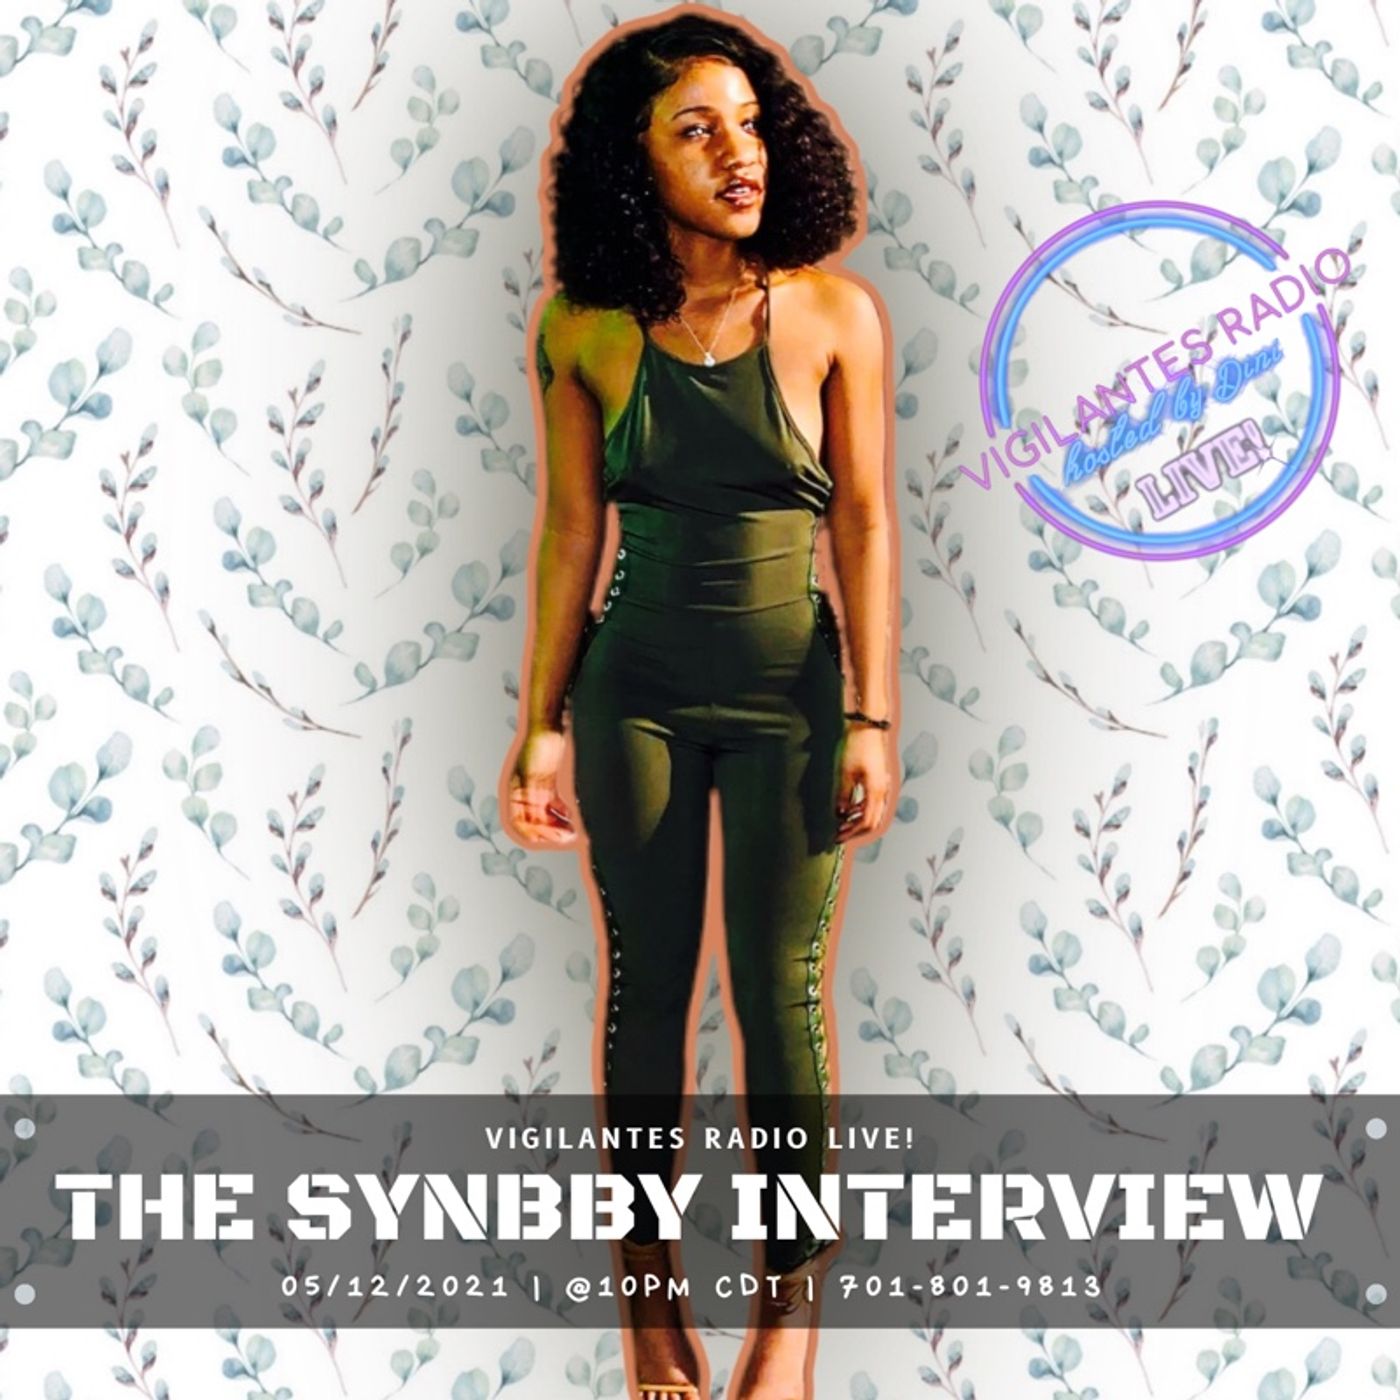 The Synbby Interview. Image